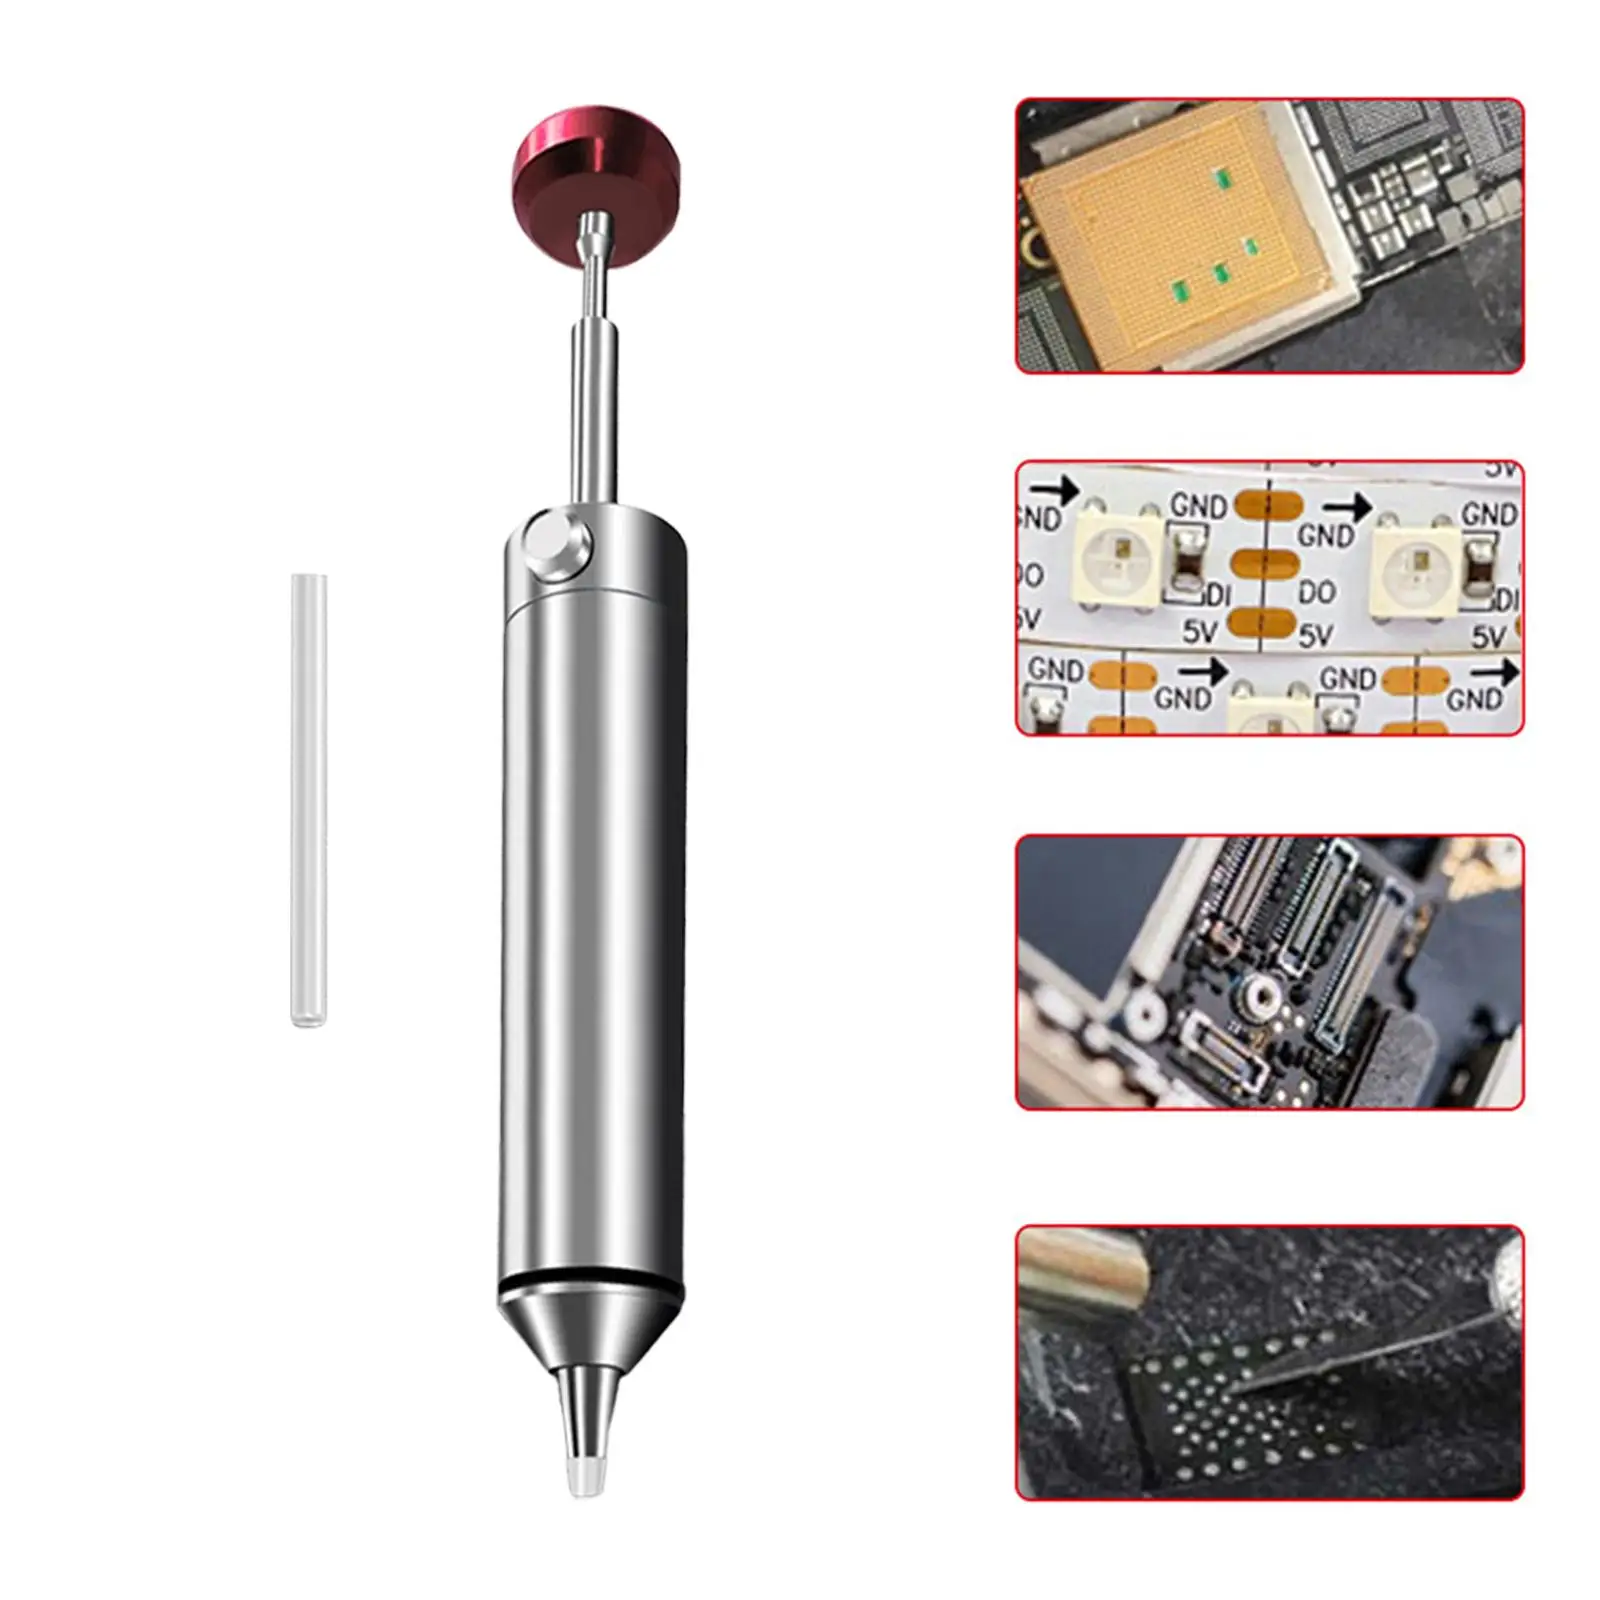 Desoldering Pump Solder Sucker Solder Removal Tool Suction Device DIY Vacuum Suction with 1 Replacement Silicone Tube Solder Pen